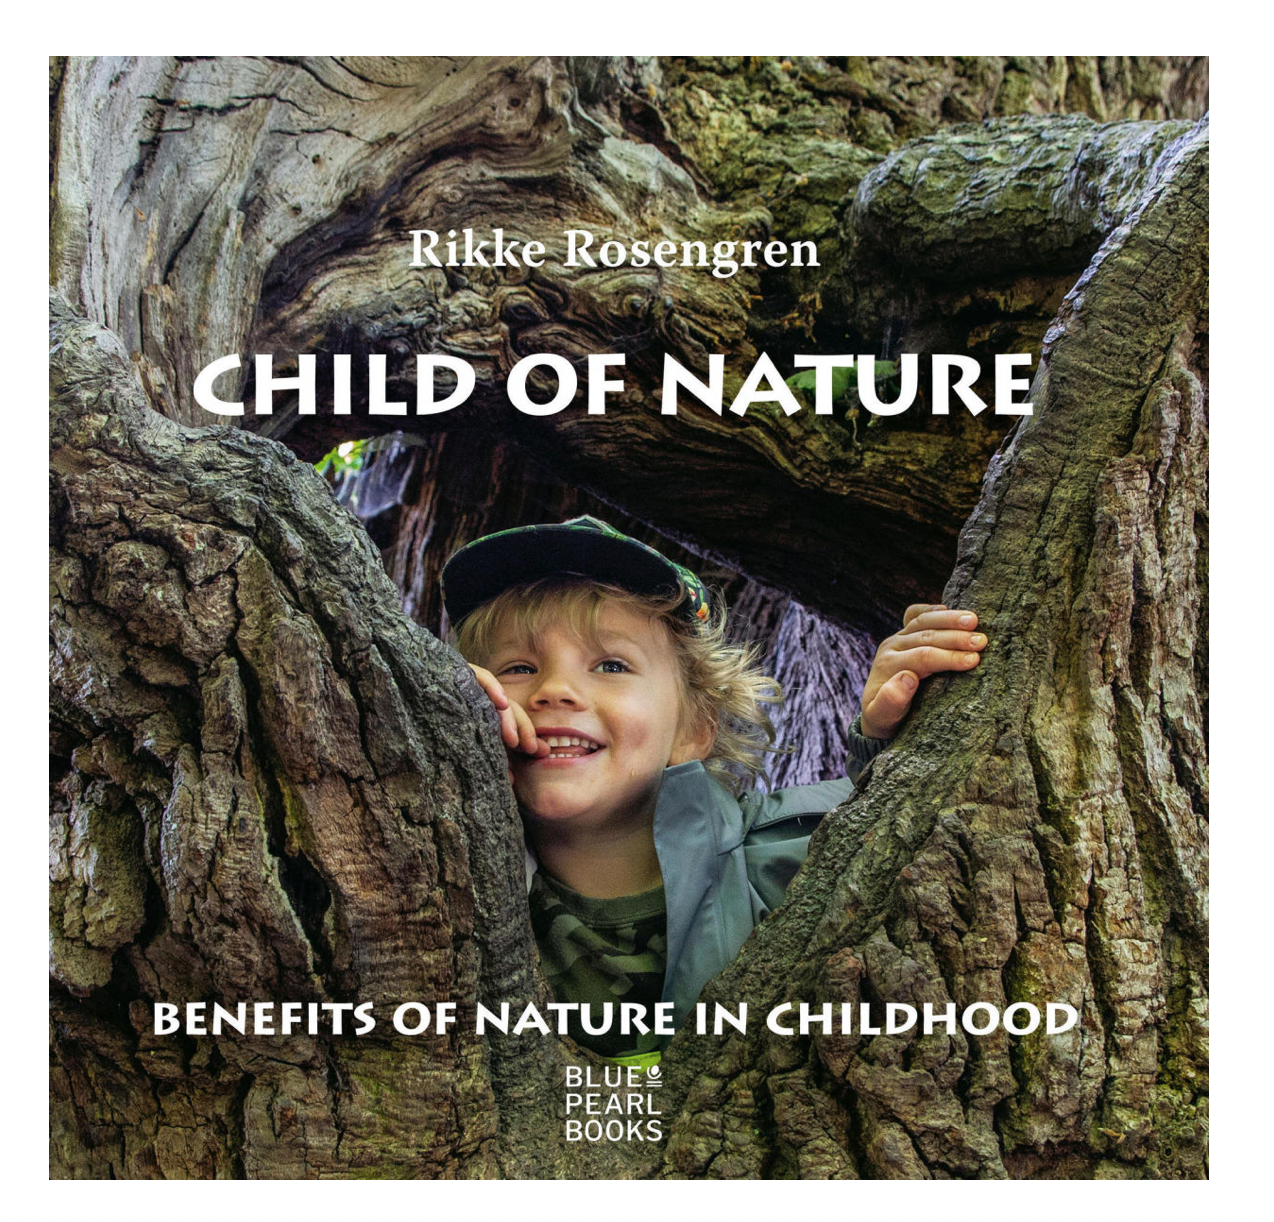 Parenting Resource Book - CHILD OF NATURE, Benefits of Nature in Childhood